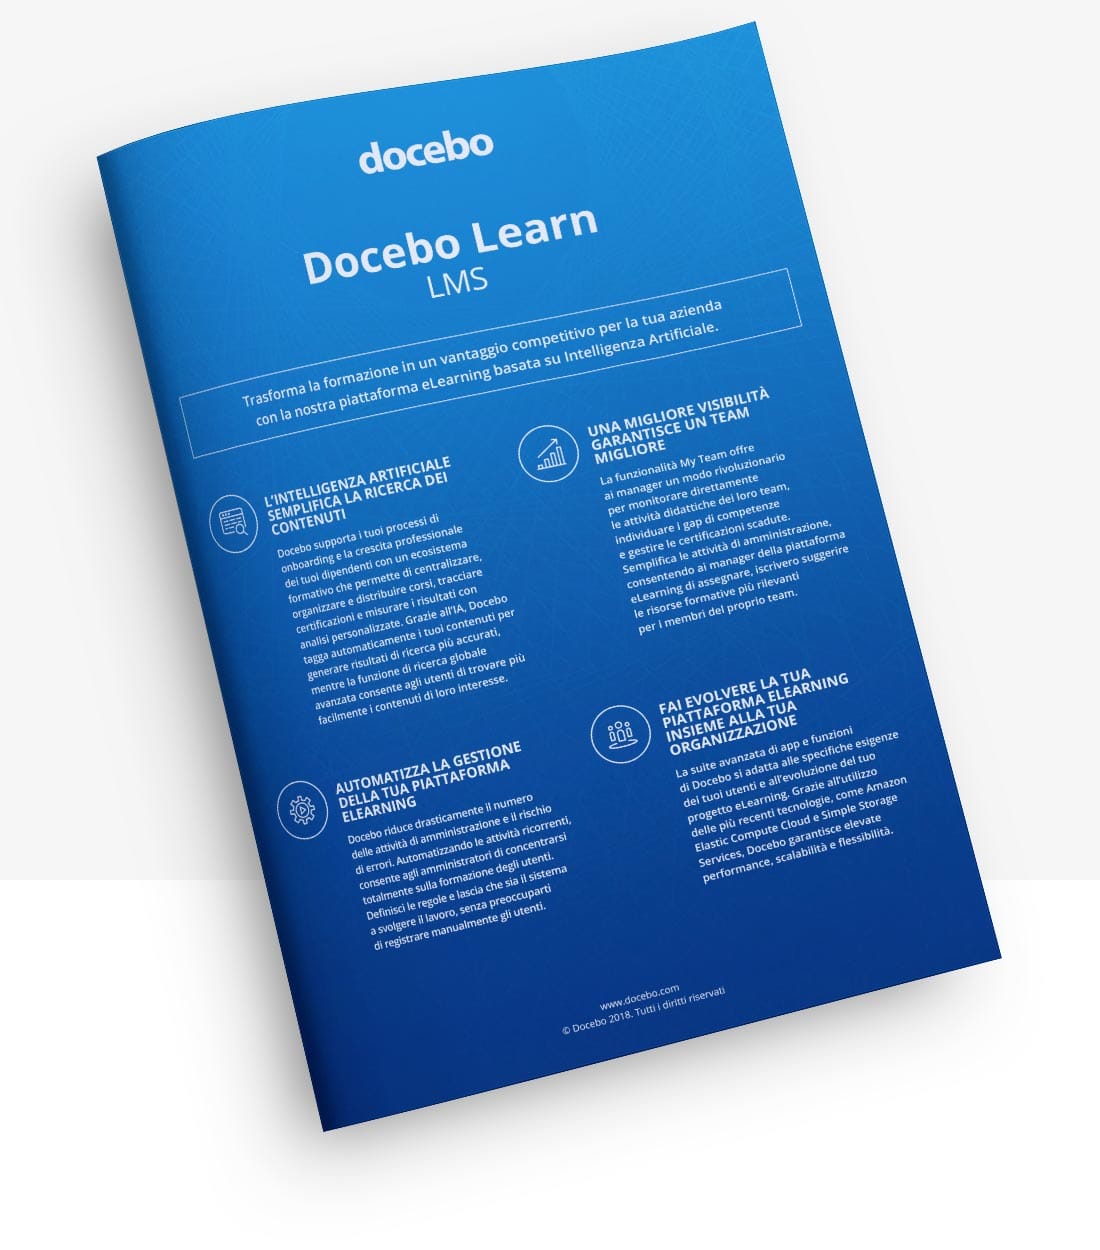 Docebo Learn (LMS)